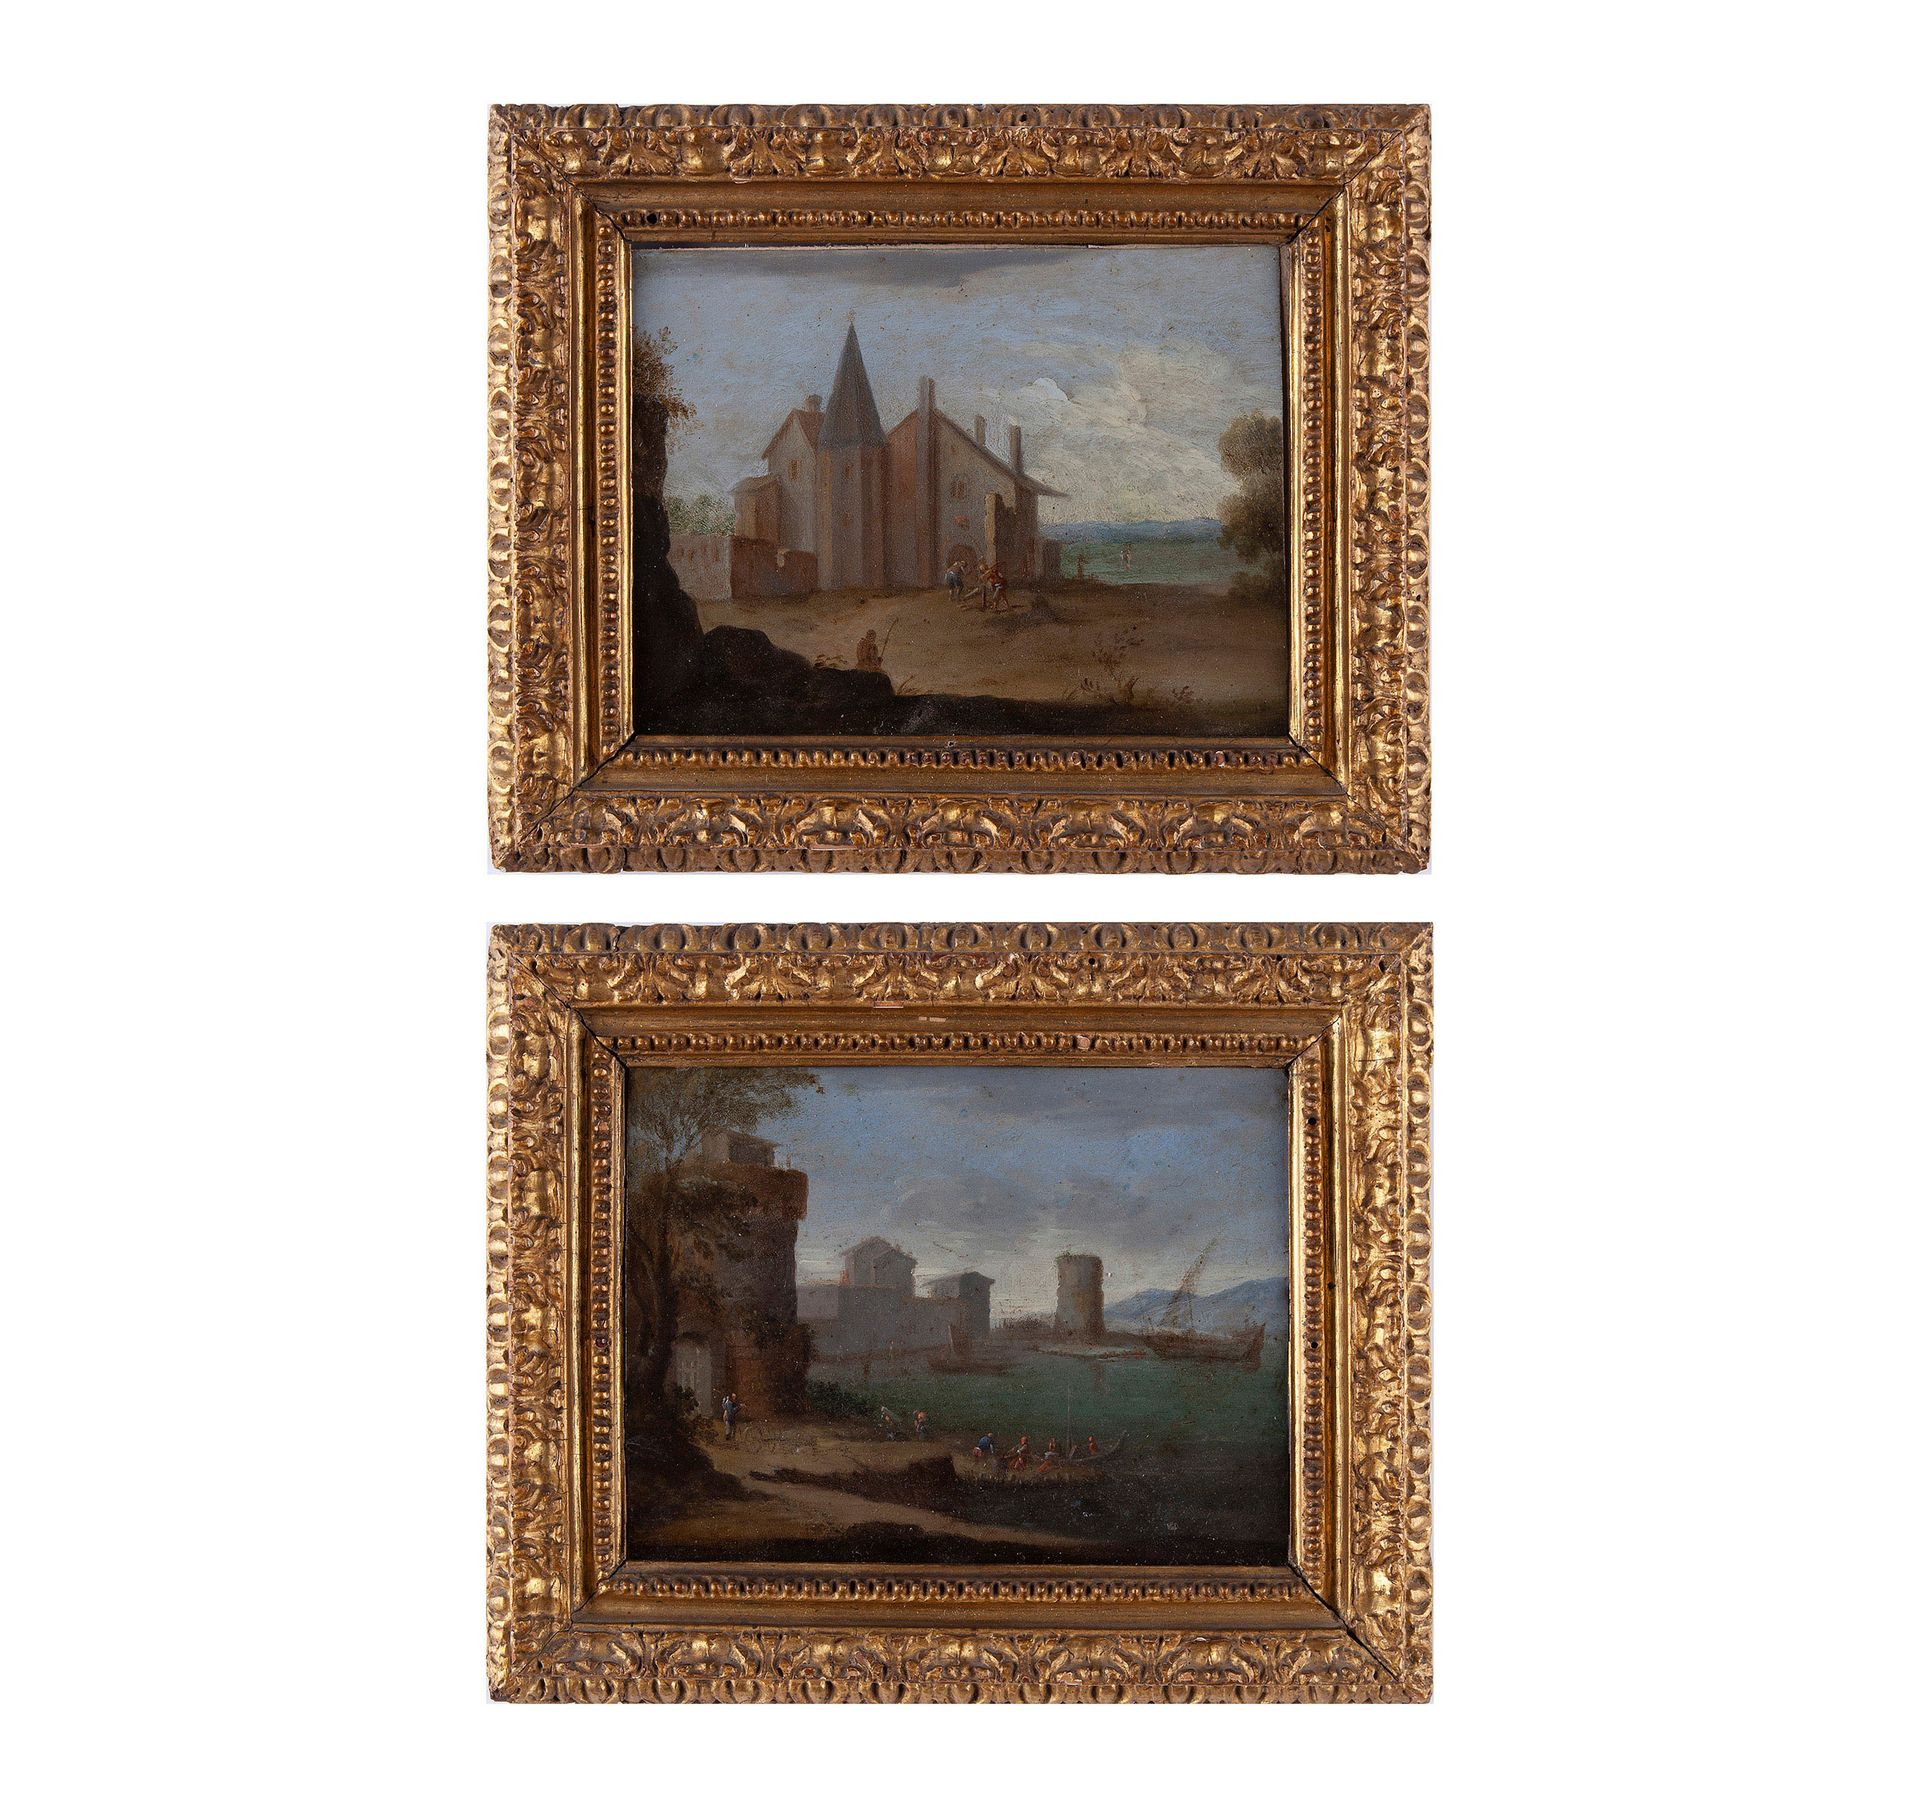 Flemish painter of the end of the 17th century, Pair of landscapes Peintre flama&hellip;